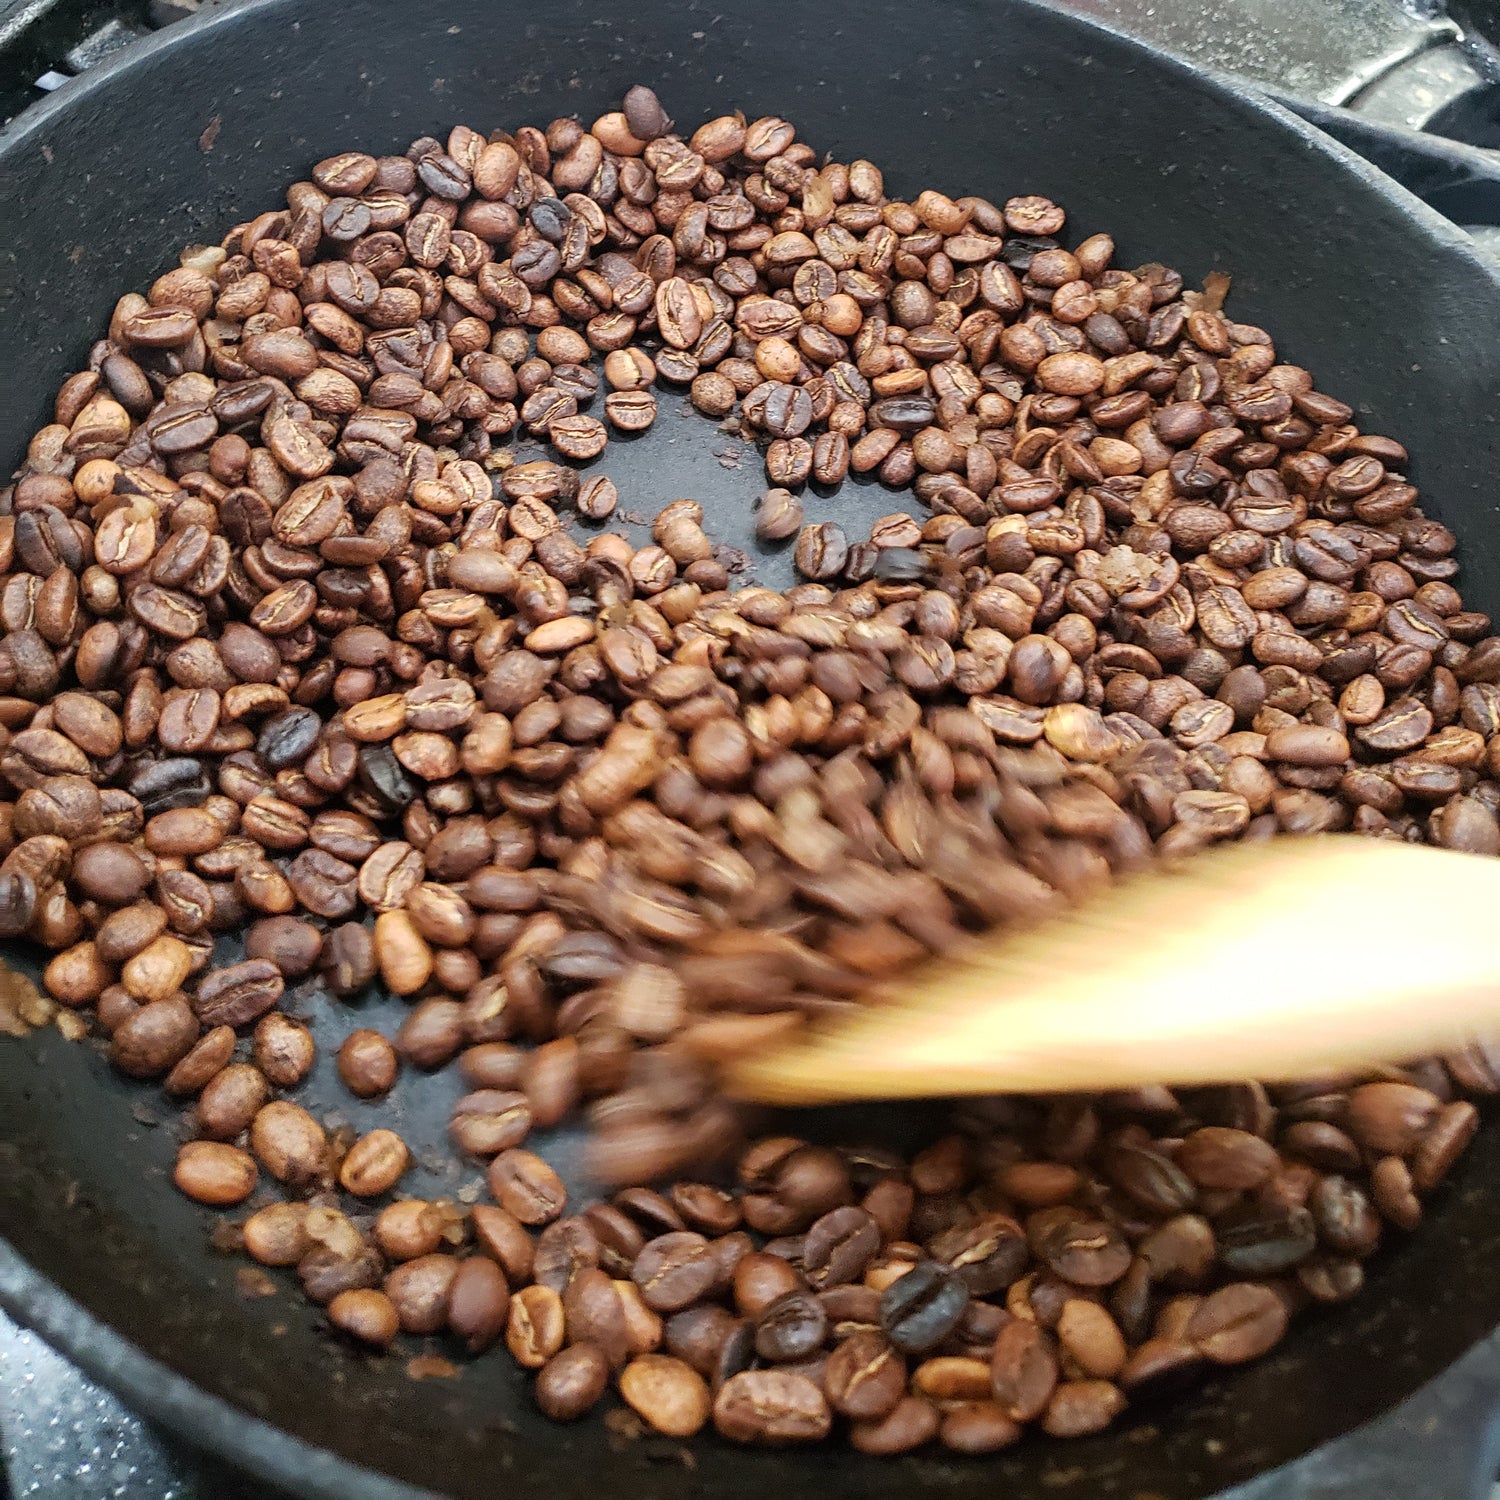 the best coffee is fresh coffee and the easiest way to roast is on a stove at home